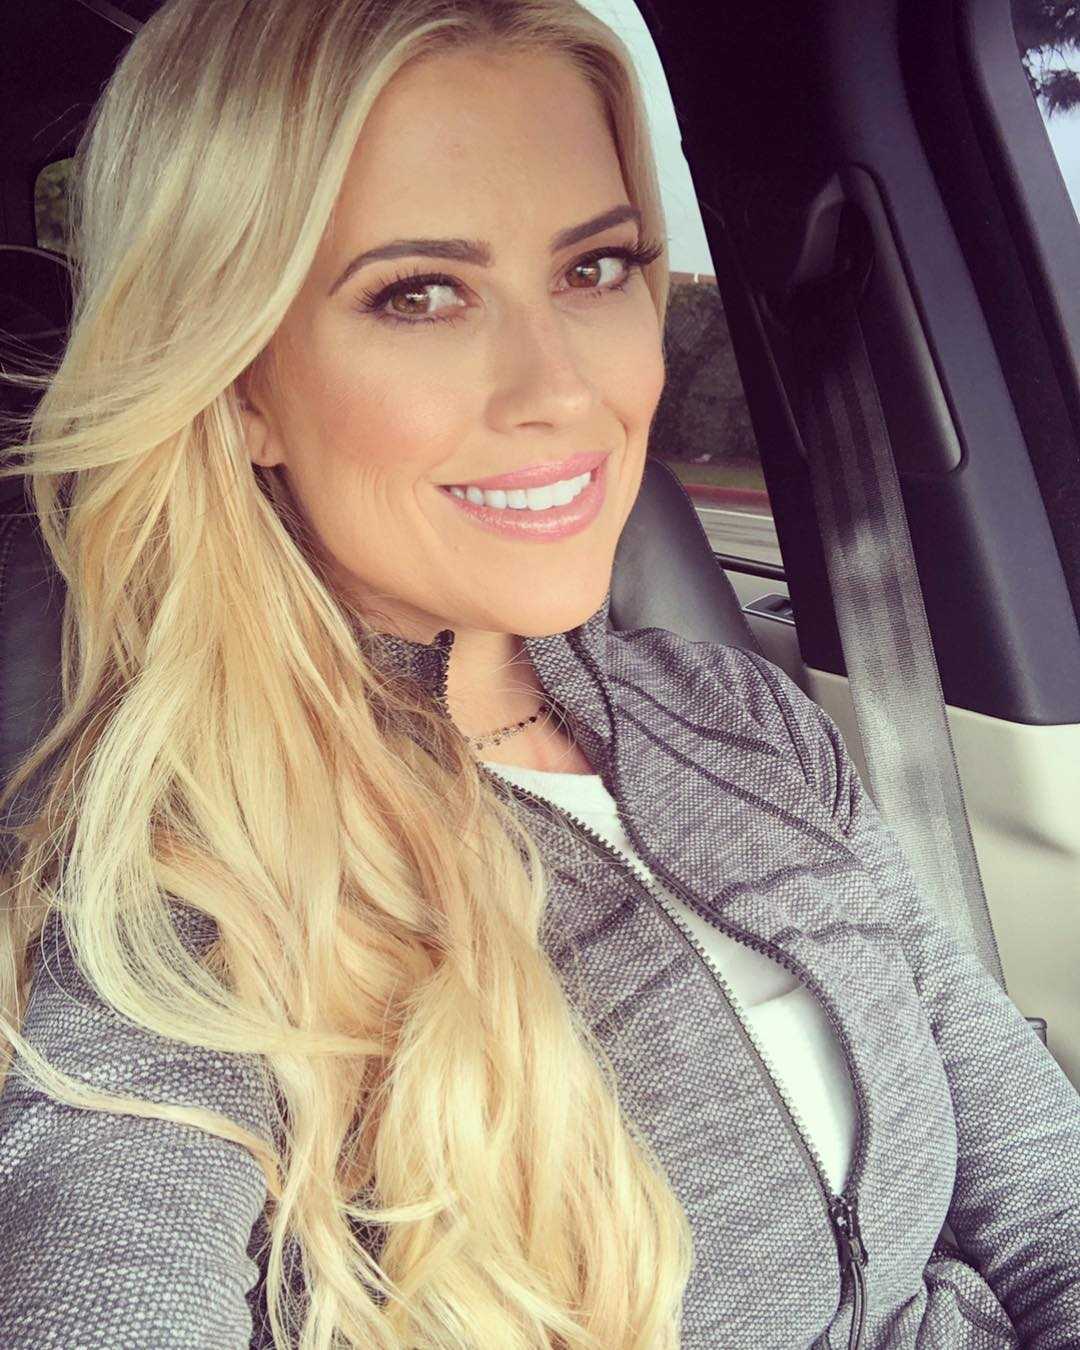 70+ Hot Pictures Of Christina Anstead Which Are Just Too Hot To Handle 3